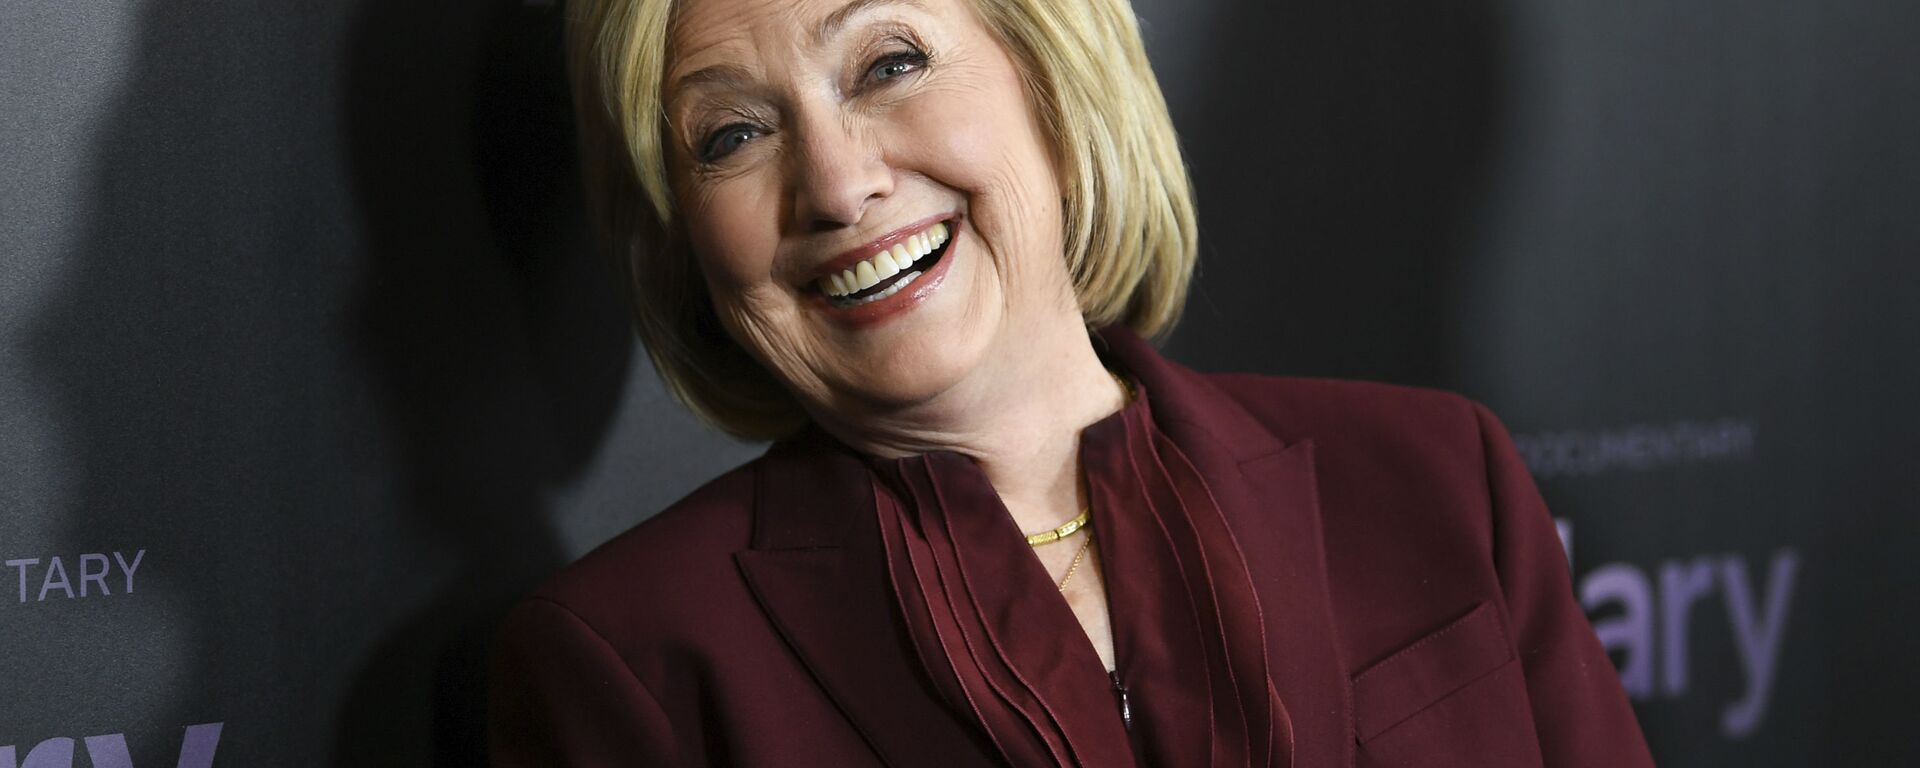 Former secretary of state Hillary Clinton attends the premiere of the Hulu documentary Hillary at the DGA New York Theater on Wednesday, March 4, 2020, in New York. - Sputnik International, 1920, 29.12.2021